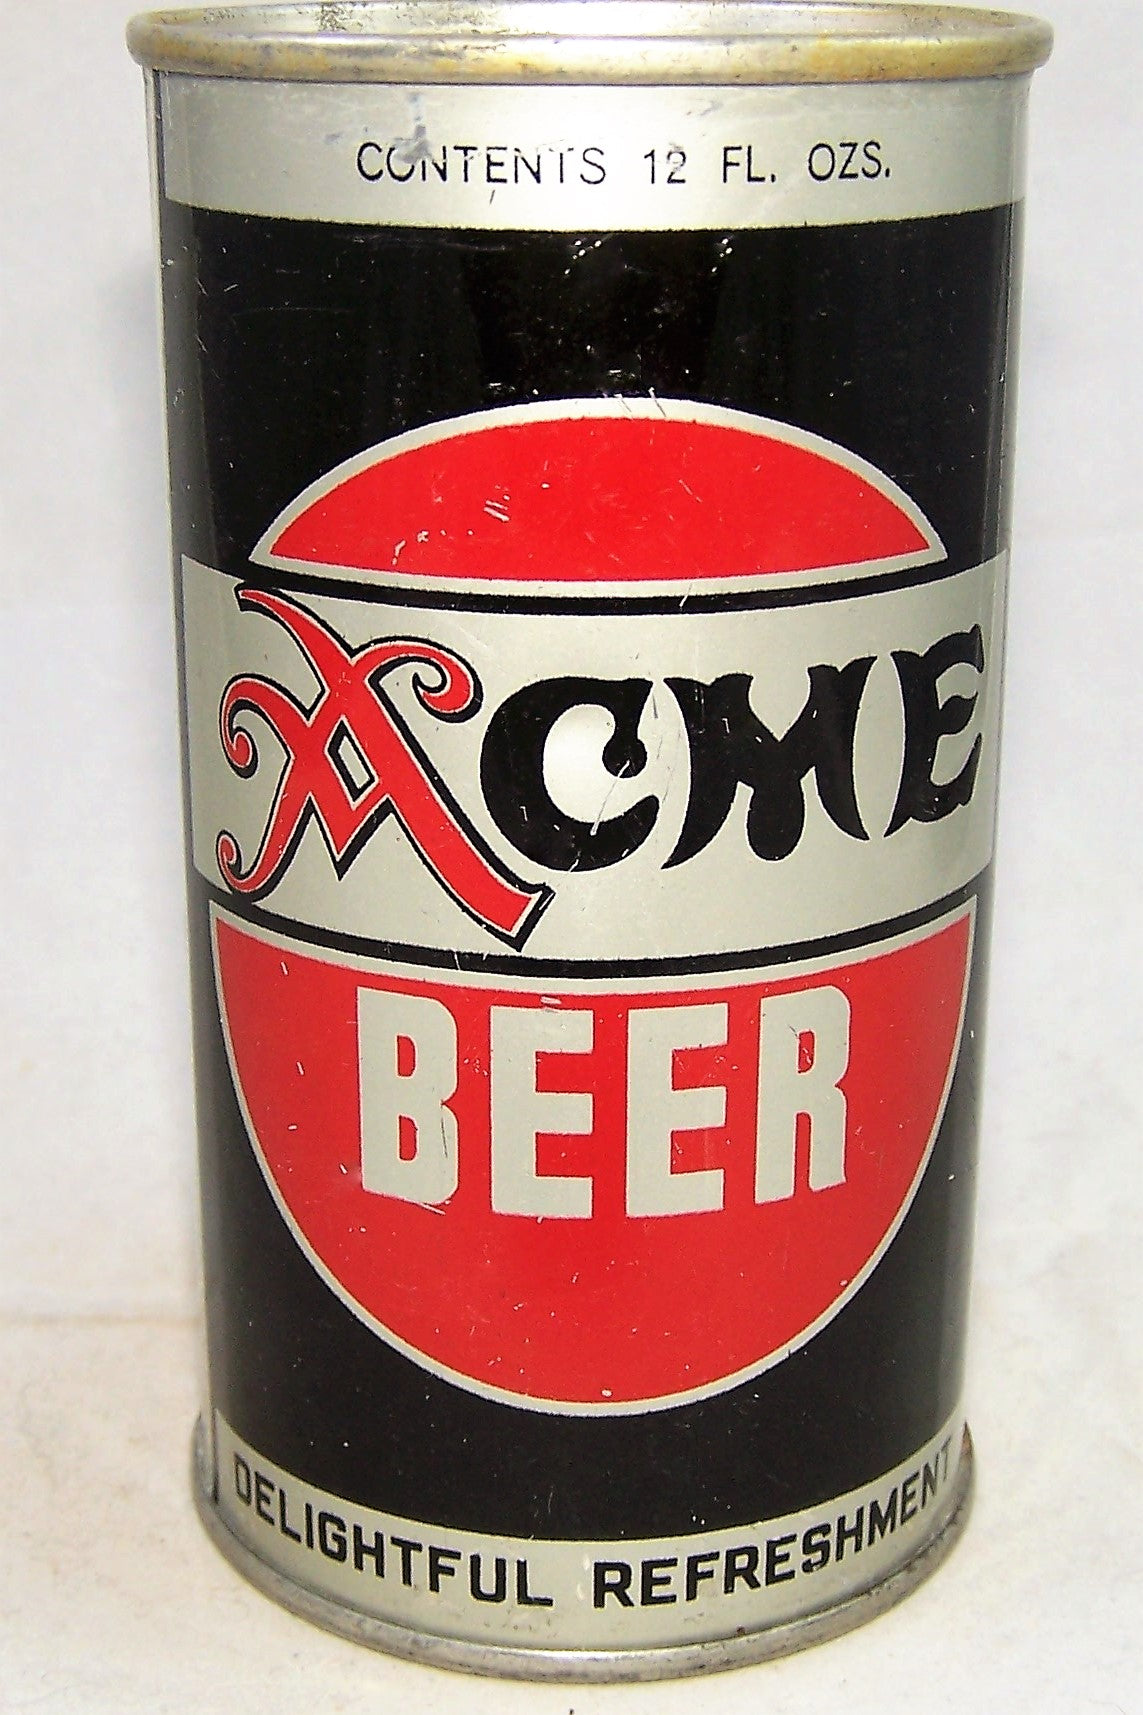 Acme Beer (Red Ball) USBC 29-03, Grade 1/1+  Sold on 05/04/18